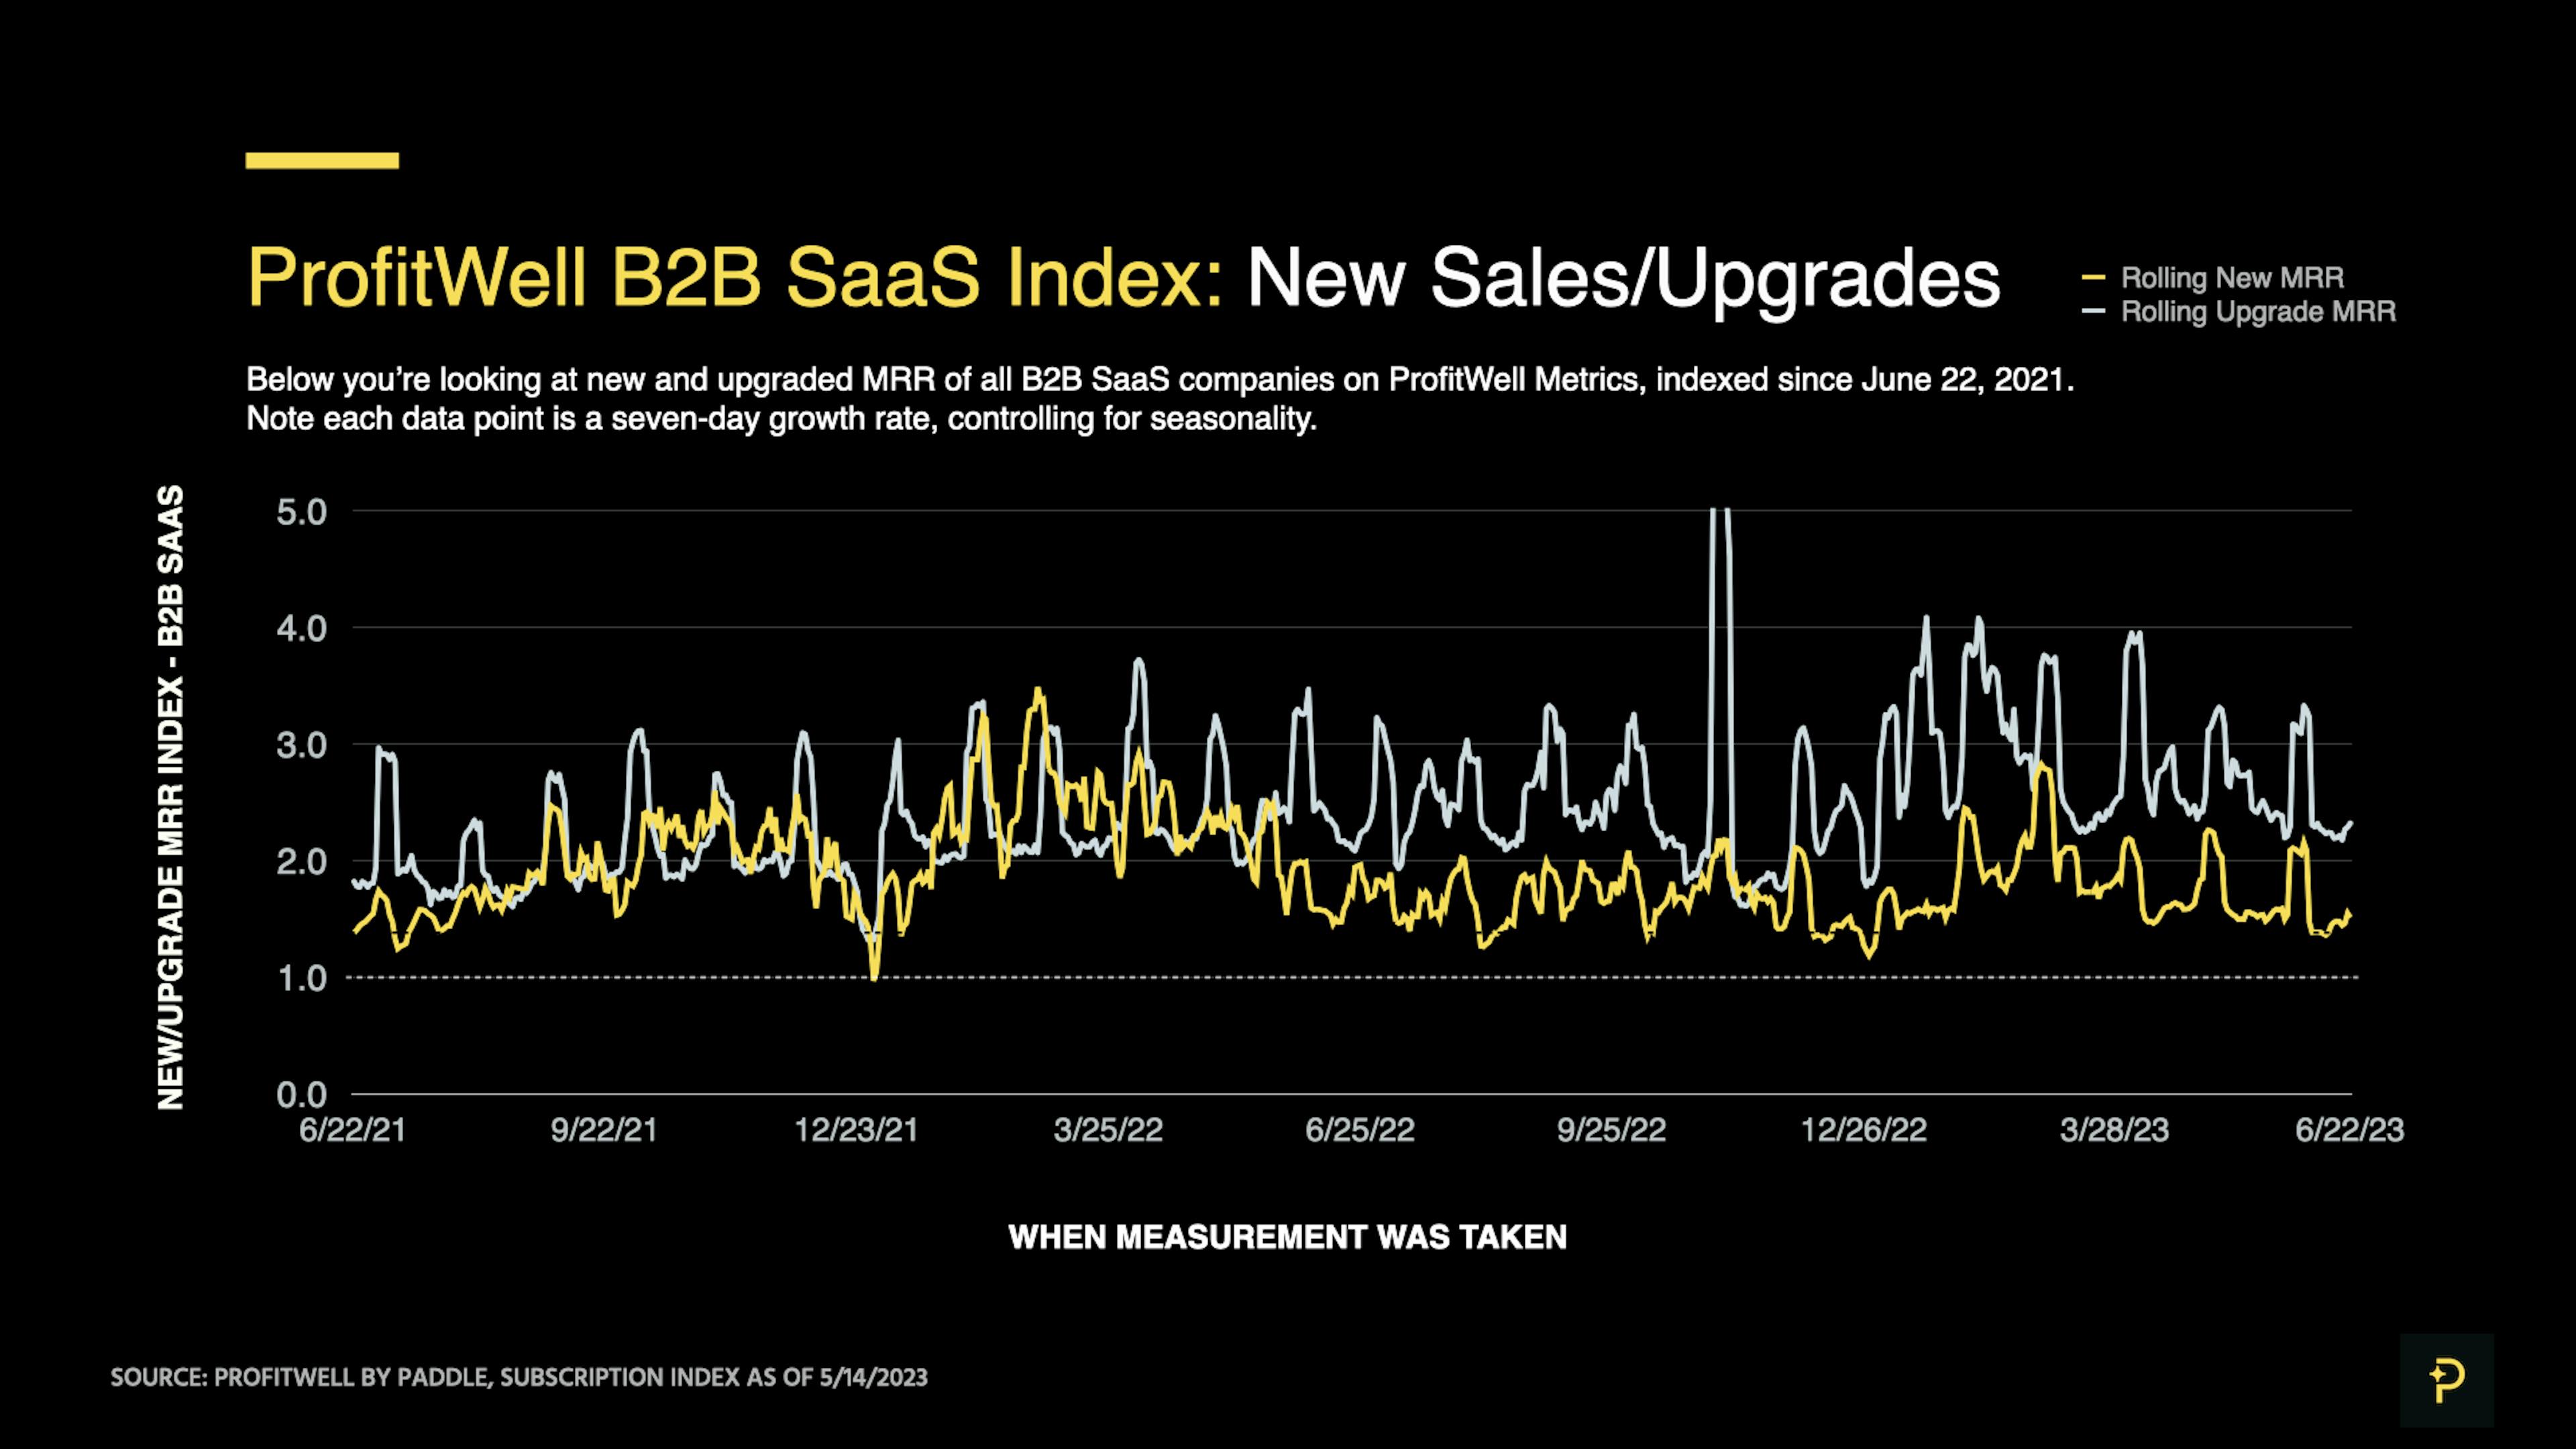 ProfitWell B2B SaaS Index - MRR impact of net new sales and upgraded revenue